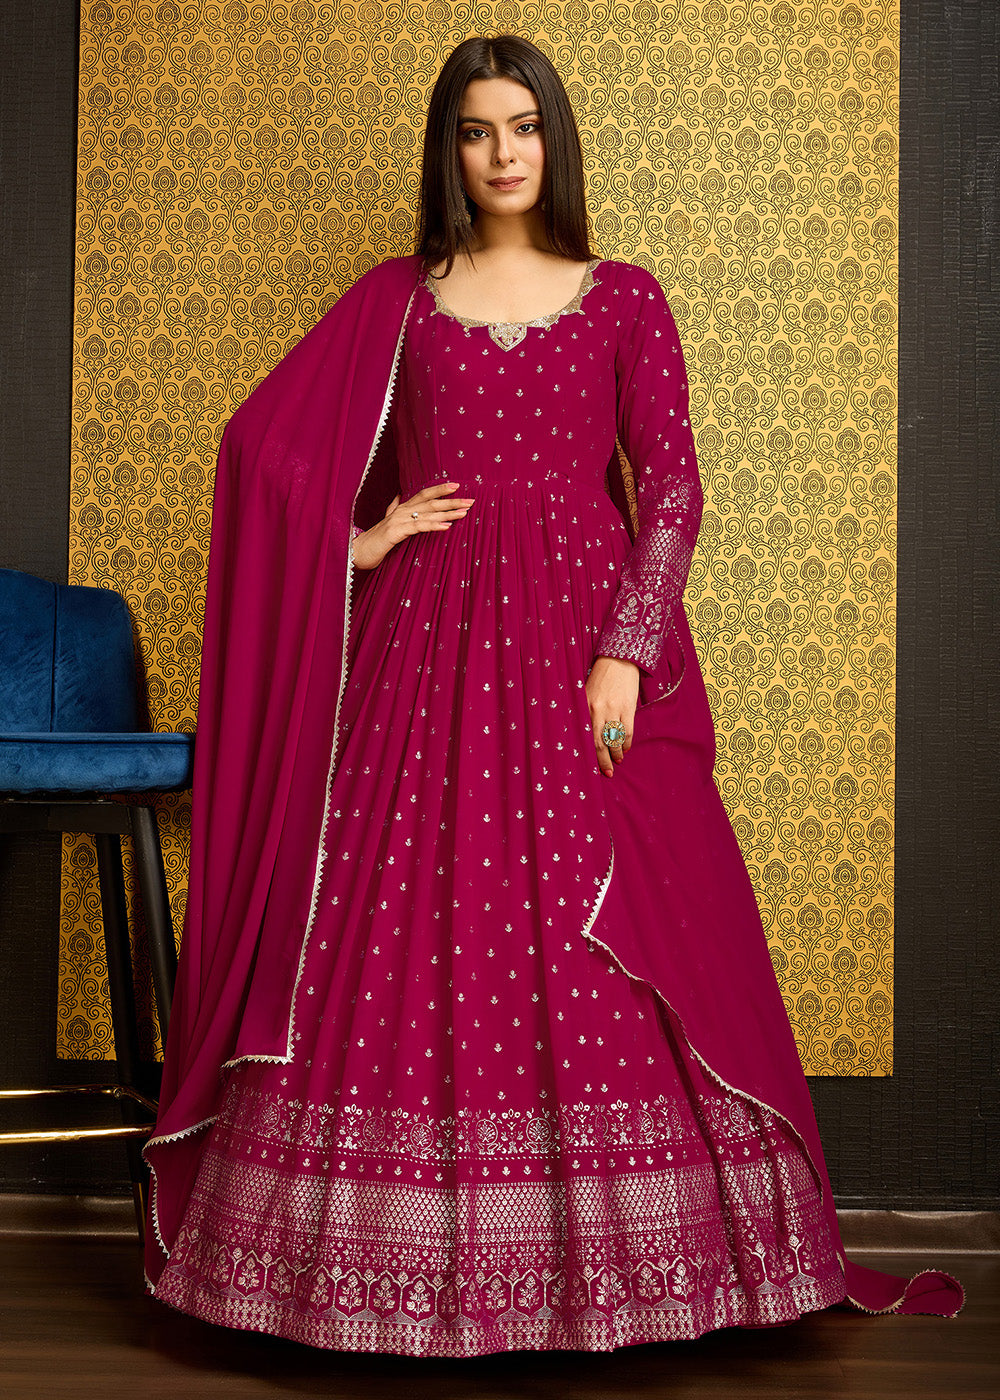 Buy Now Rani Pink Metalic Foil Work Embroidered Wedding Wear Gown Online in USA, UK, Australia, Canada & Worldwide at Empress Clothing.